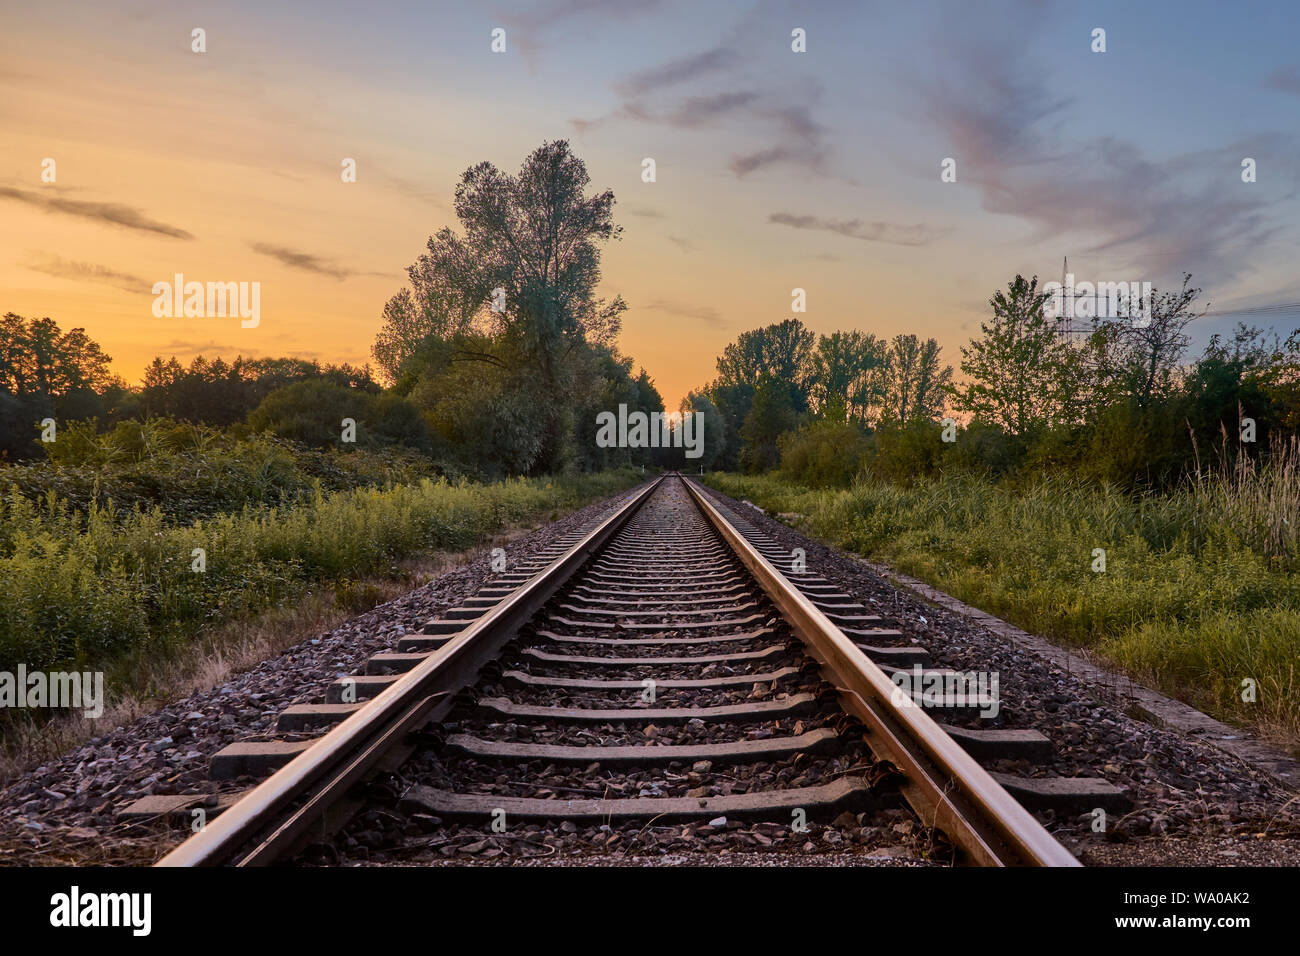 Railroad track in countryside landscape at sunset in Rastatt, Germany Stock Photo